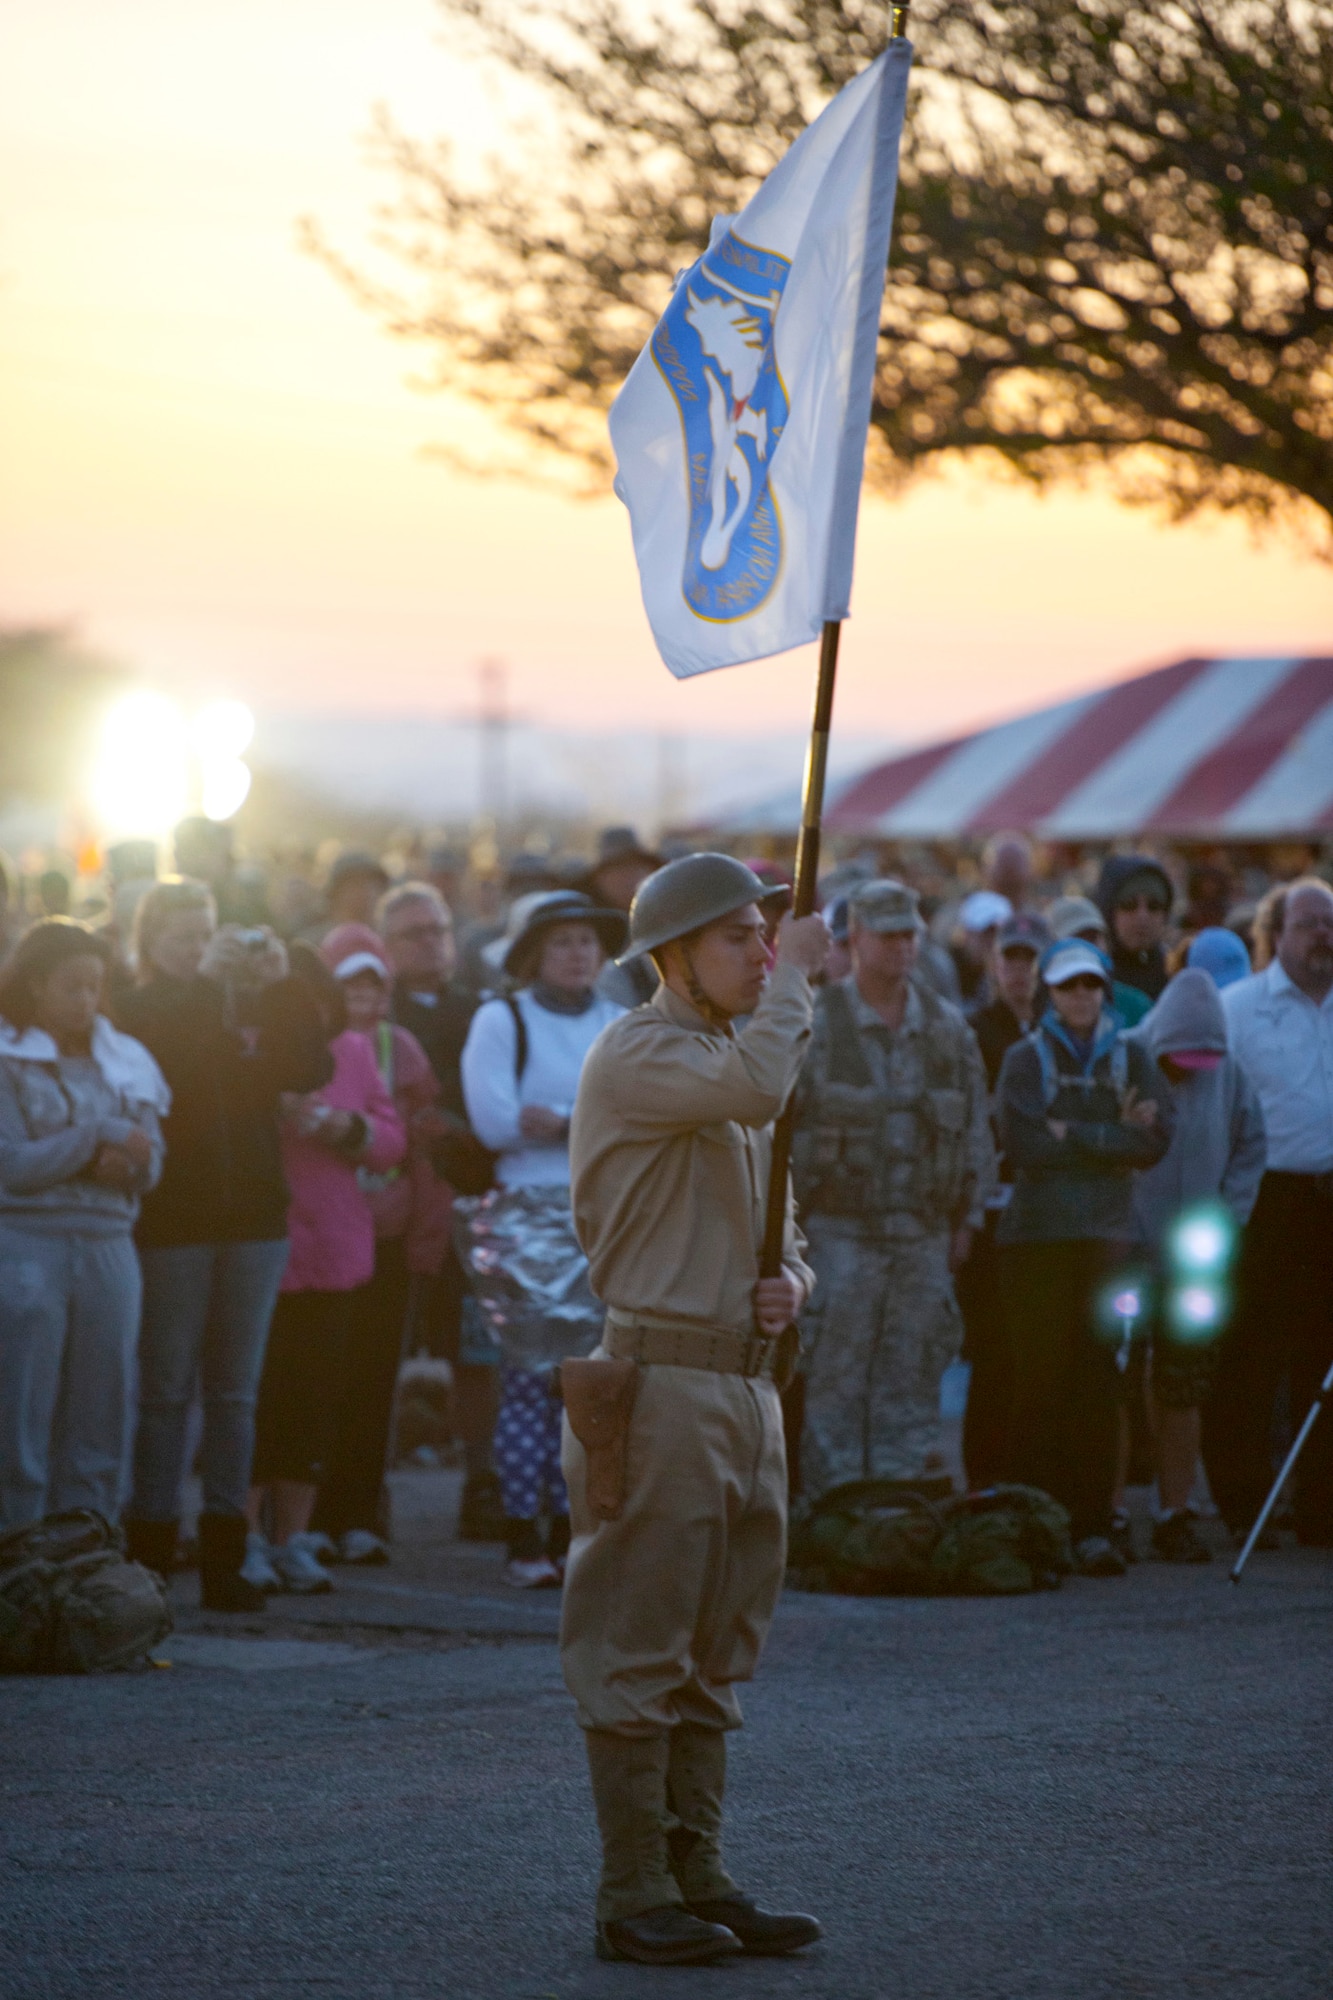 A participant of the 22nd Annual Bataan Memorial Death March holds a flag March 27, 2011 during a moment of silence at White Sands Missile Range, New Mexico. Three remaining survivors attended the opening ceremony. The event, attended by a record number of more than 6,000 marchers, commemorated the original Bataan Death March, which occurred in the Philippines during World War II. (U.S. Air Force photo/Airman 1st Class Joshua Turner) 